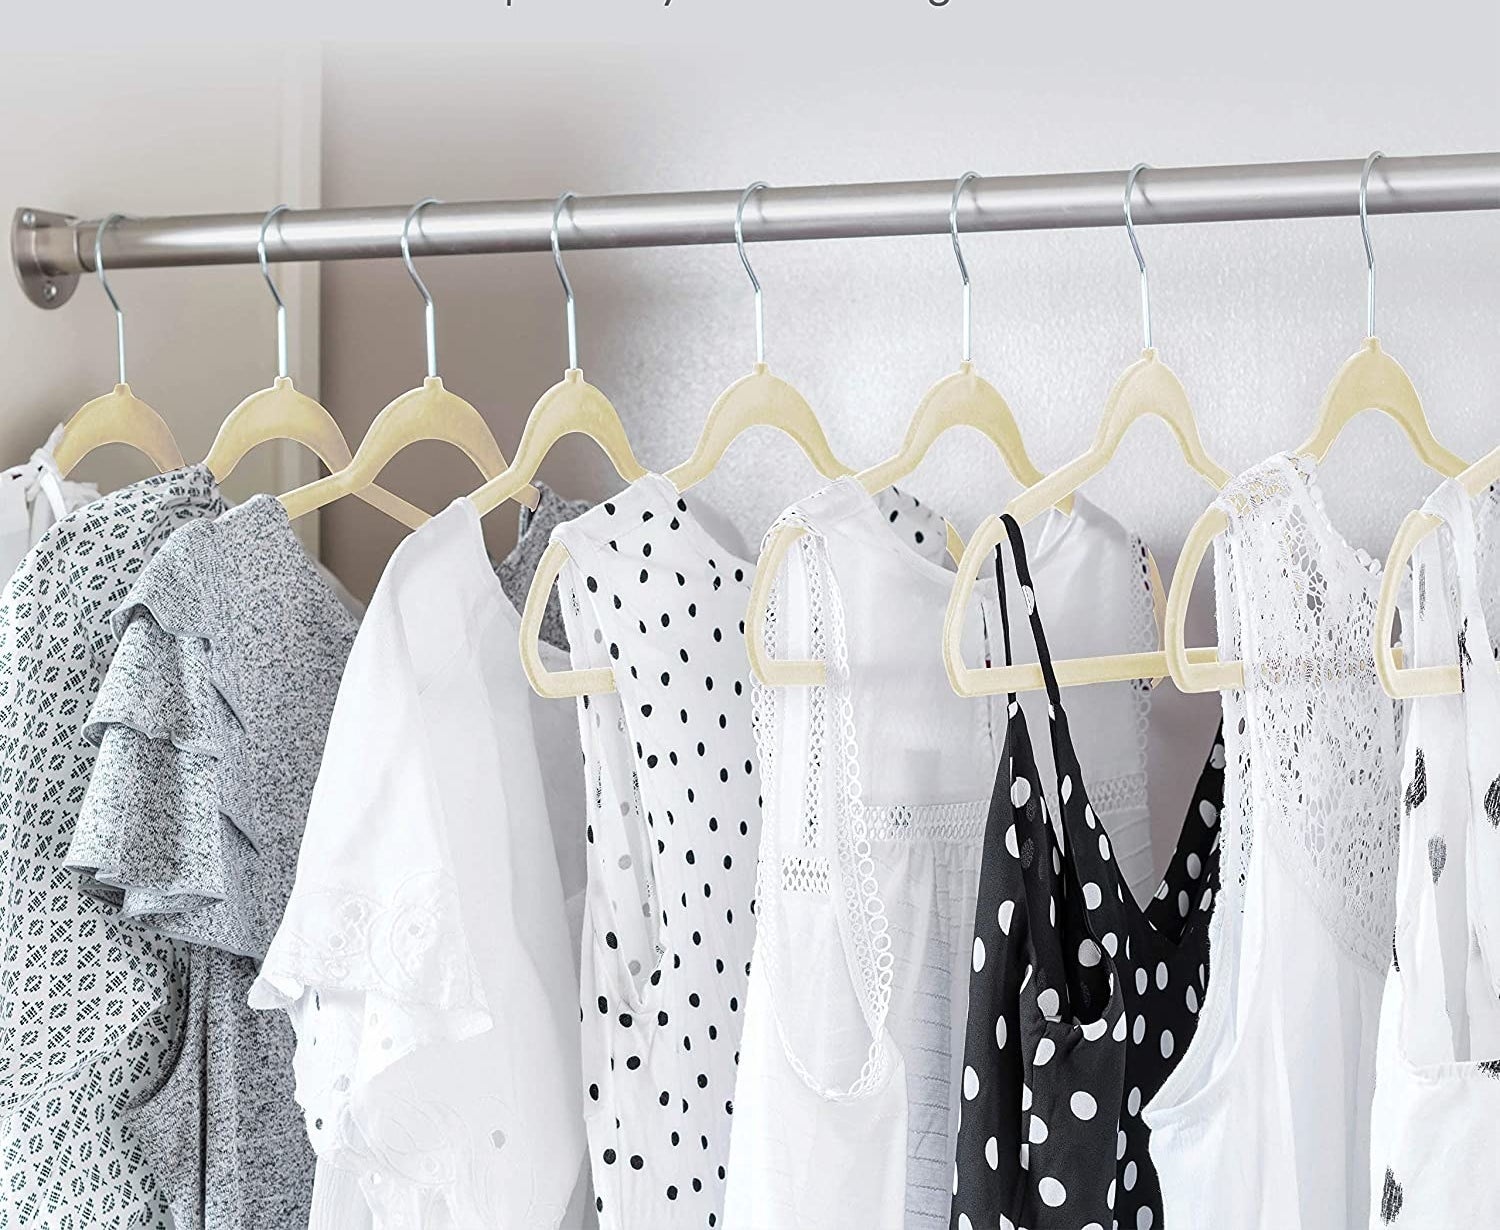 An open closet filled with neatly hung clothes on the velvet hangers